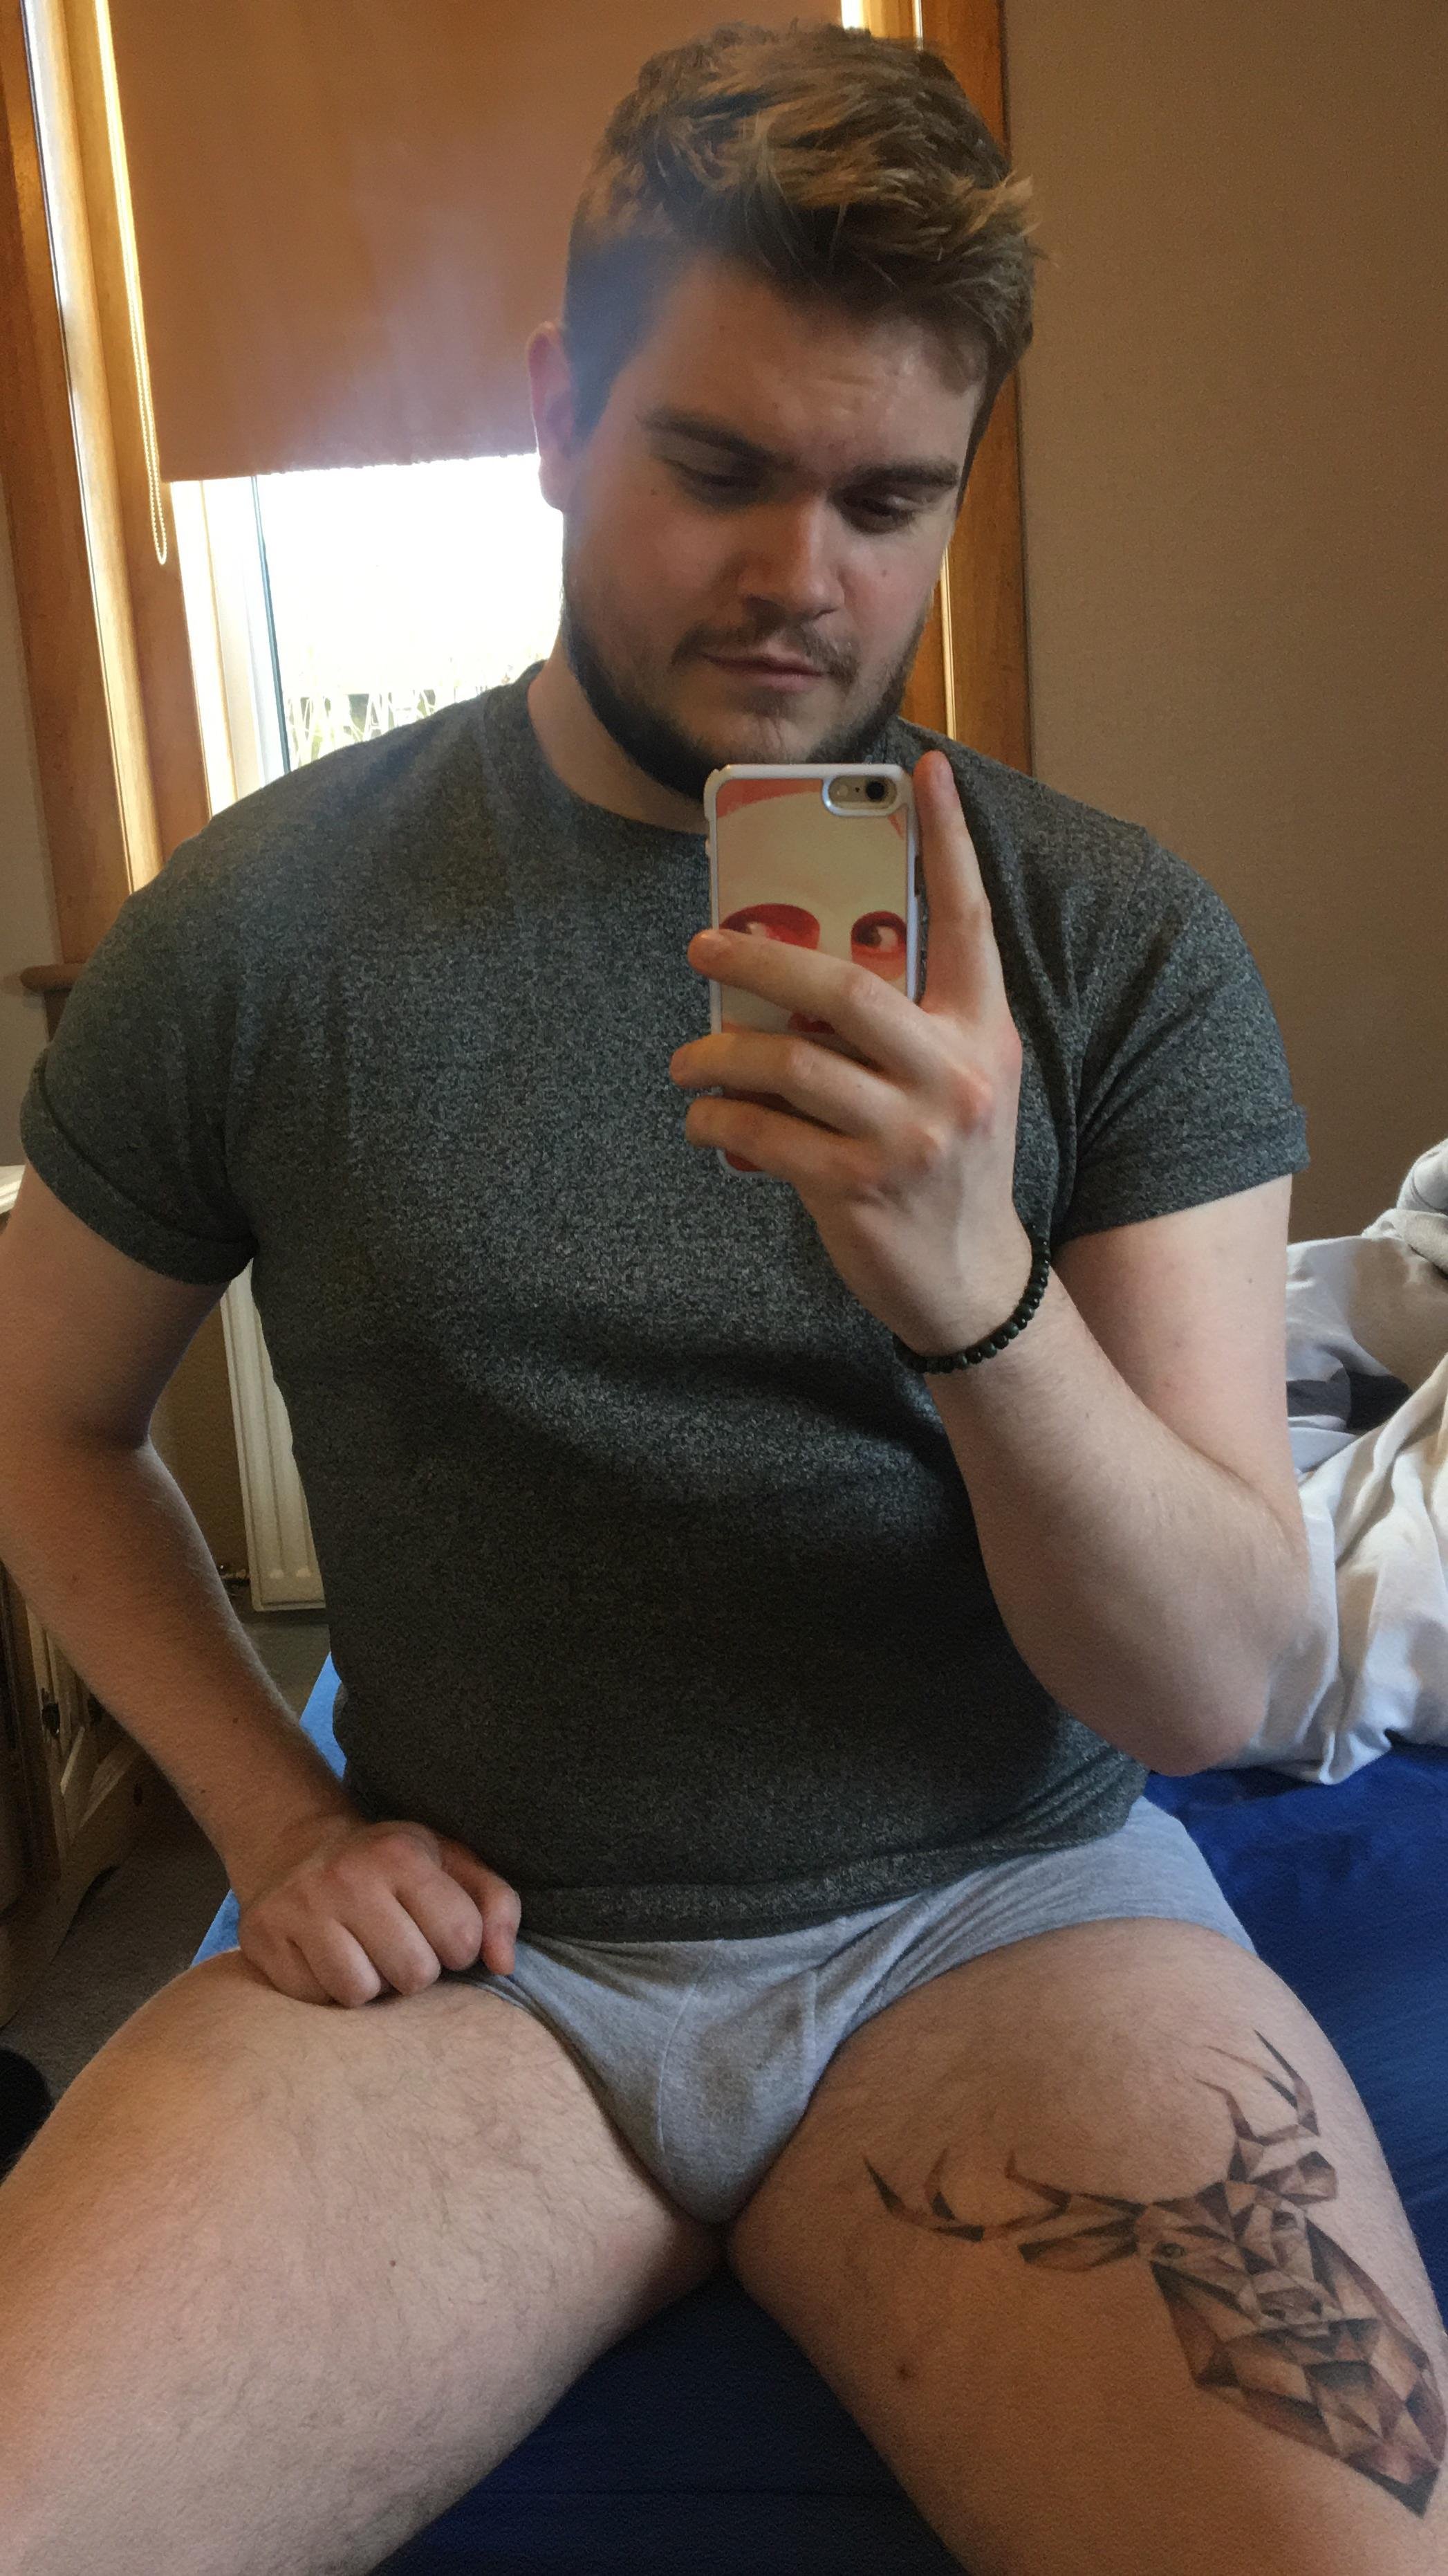 Thick thighs make a dick rise?